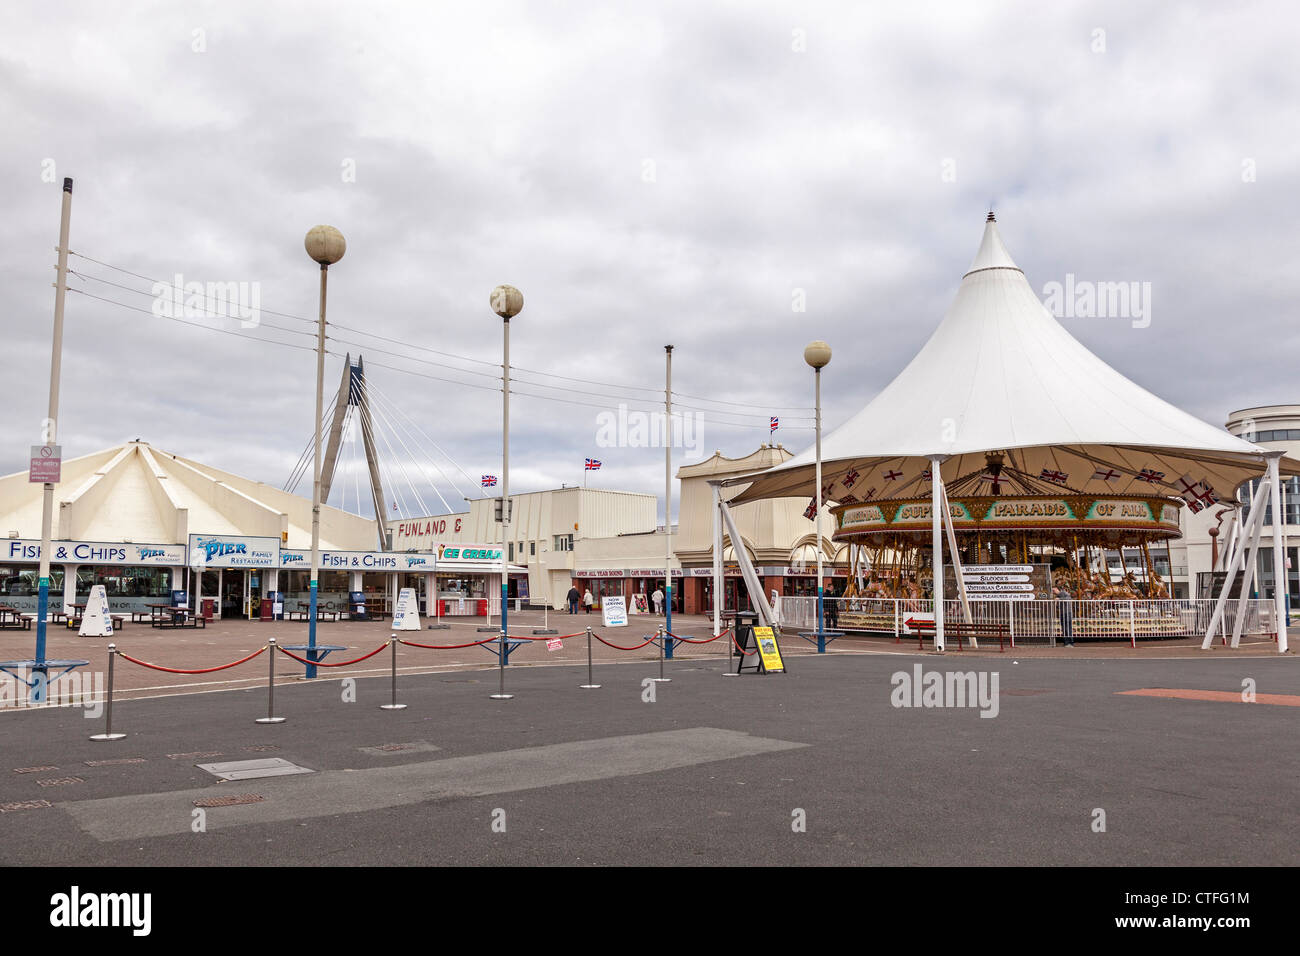 Amusements and Funland at the entrance to Southport pier. Stock Photo